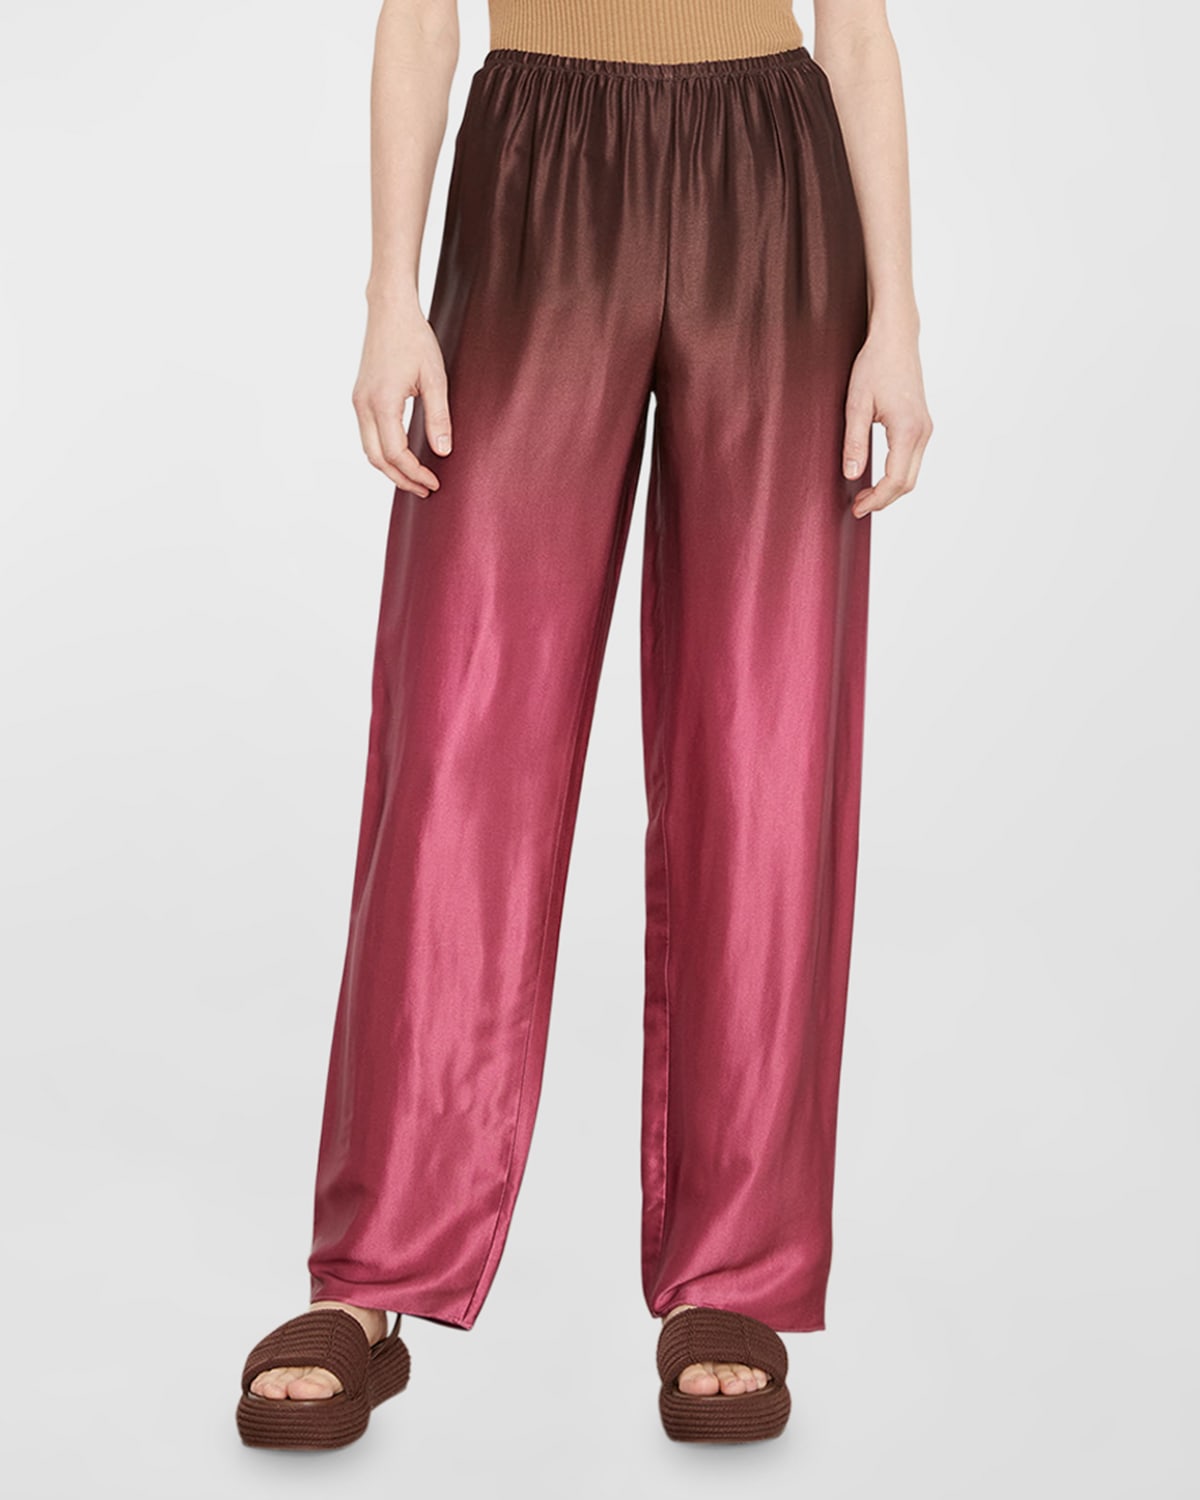 Mid-Waist Ombre Printed Pull-On Pants